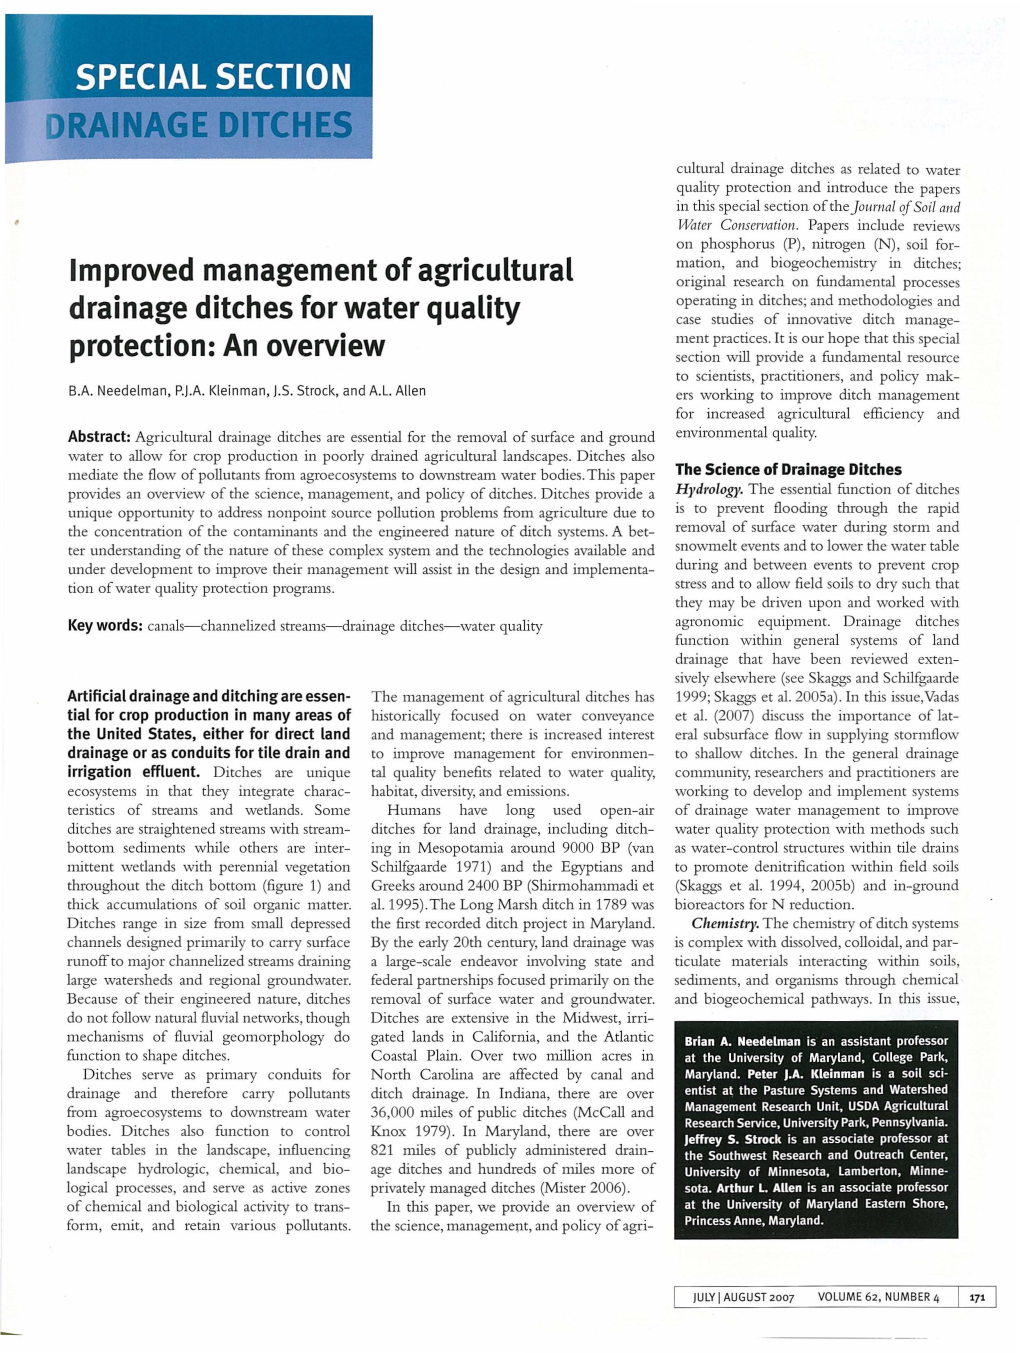 Improved Management of Agricultural Drainage Ditches for Water Quality Protection